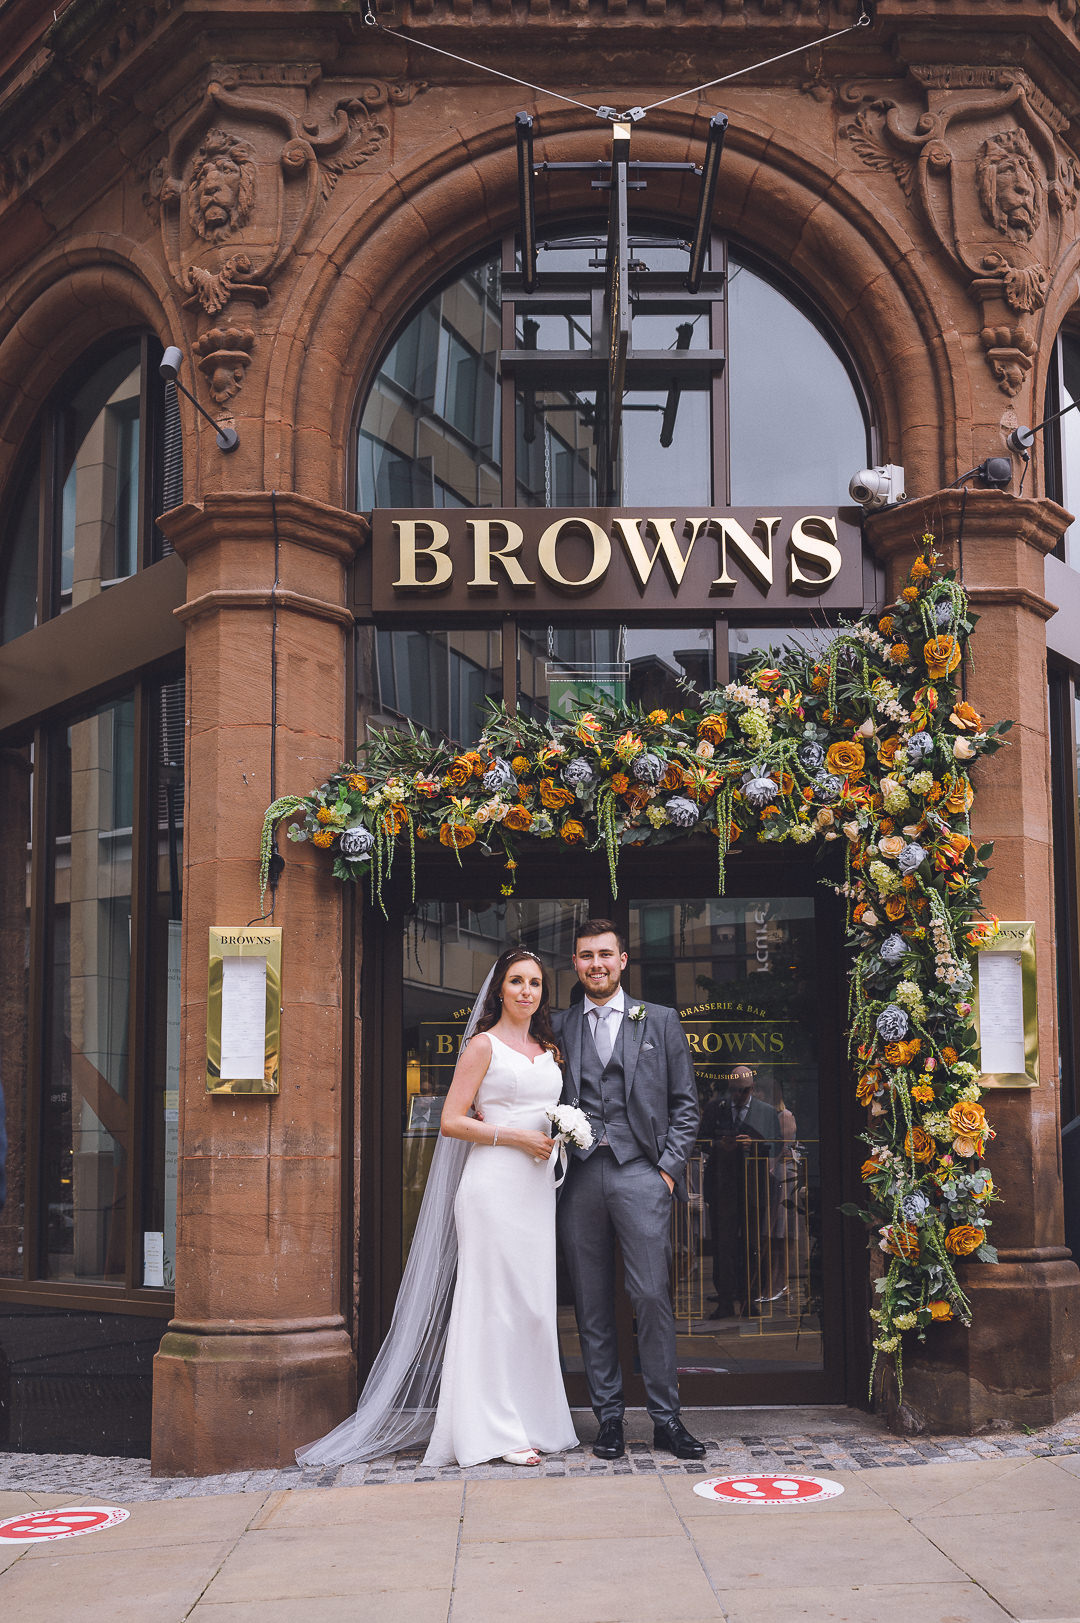 The bride and groom are standing in front of browns restaruant